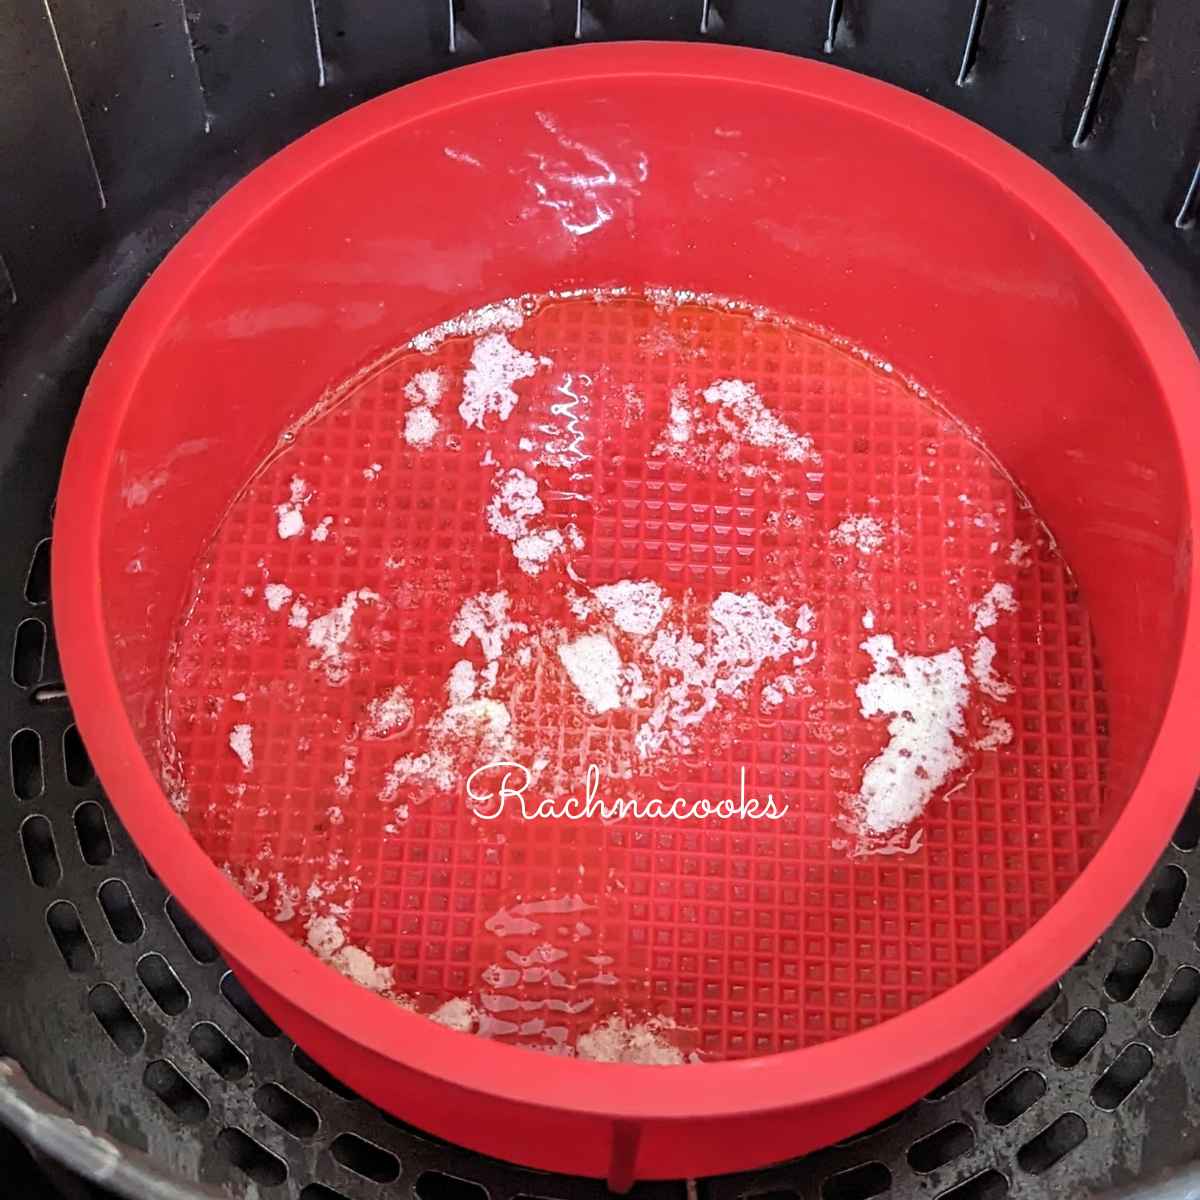 Melted butter in silicone mould in air fryer basket.